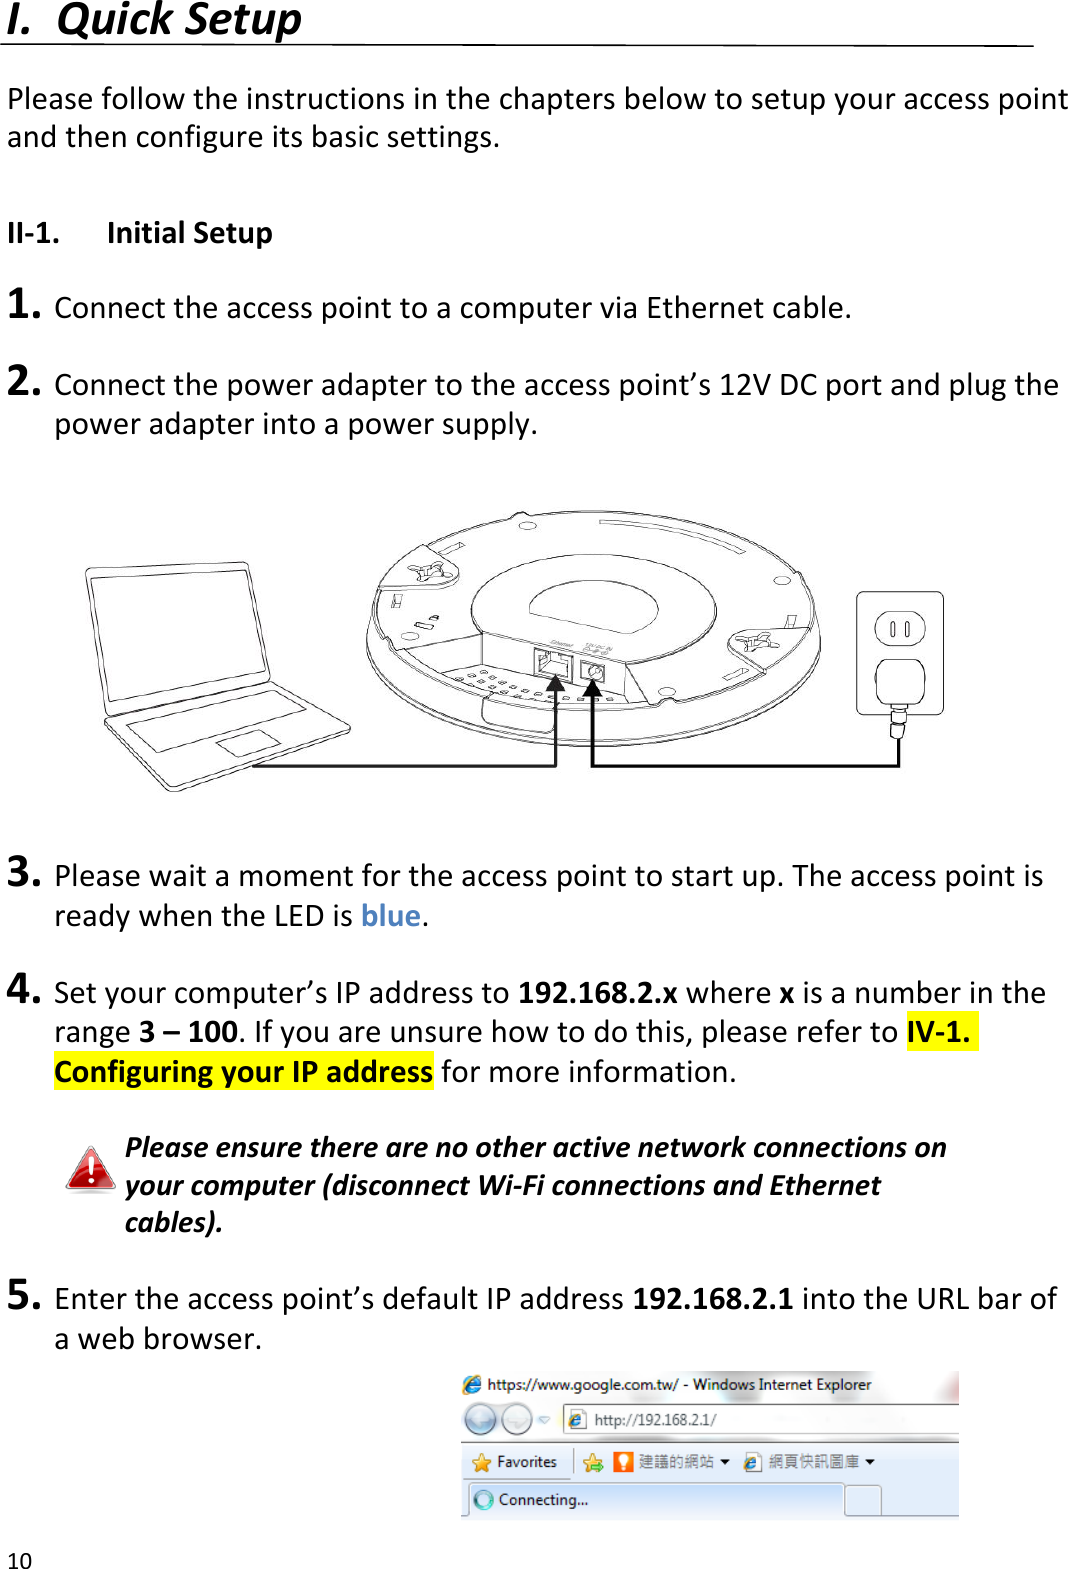 10  I. Quick Setup  Please follow the instructions in the chapters below to setup your access point and then configure its basic settings.  II-1.  Initial Setup  1. Connect the access point to a computer via Ethernet cable.  2. Connect the power adapter to the access point’s 12V DC port and plug the power adapter into a power supply.    3. Please wait a moment for the access point to start up. The access point is ready when the LED is blue.  4. Set your computer’s IP address to 192.168.2.x where x is a number in the range 3 – 100. If you are unsure how to do this, please refer to IV-1. Configuring your IP address for more information.  Please ensure there are no other active network connections on your computer (disconnect Wi-Fi connections and Ethernet cables).  5. Enter the access point’s default IP address 192.168.2.1 into the URL bar of a web browser.     